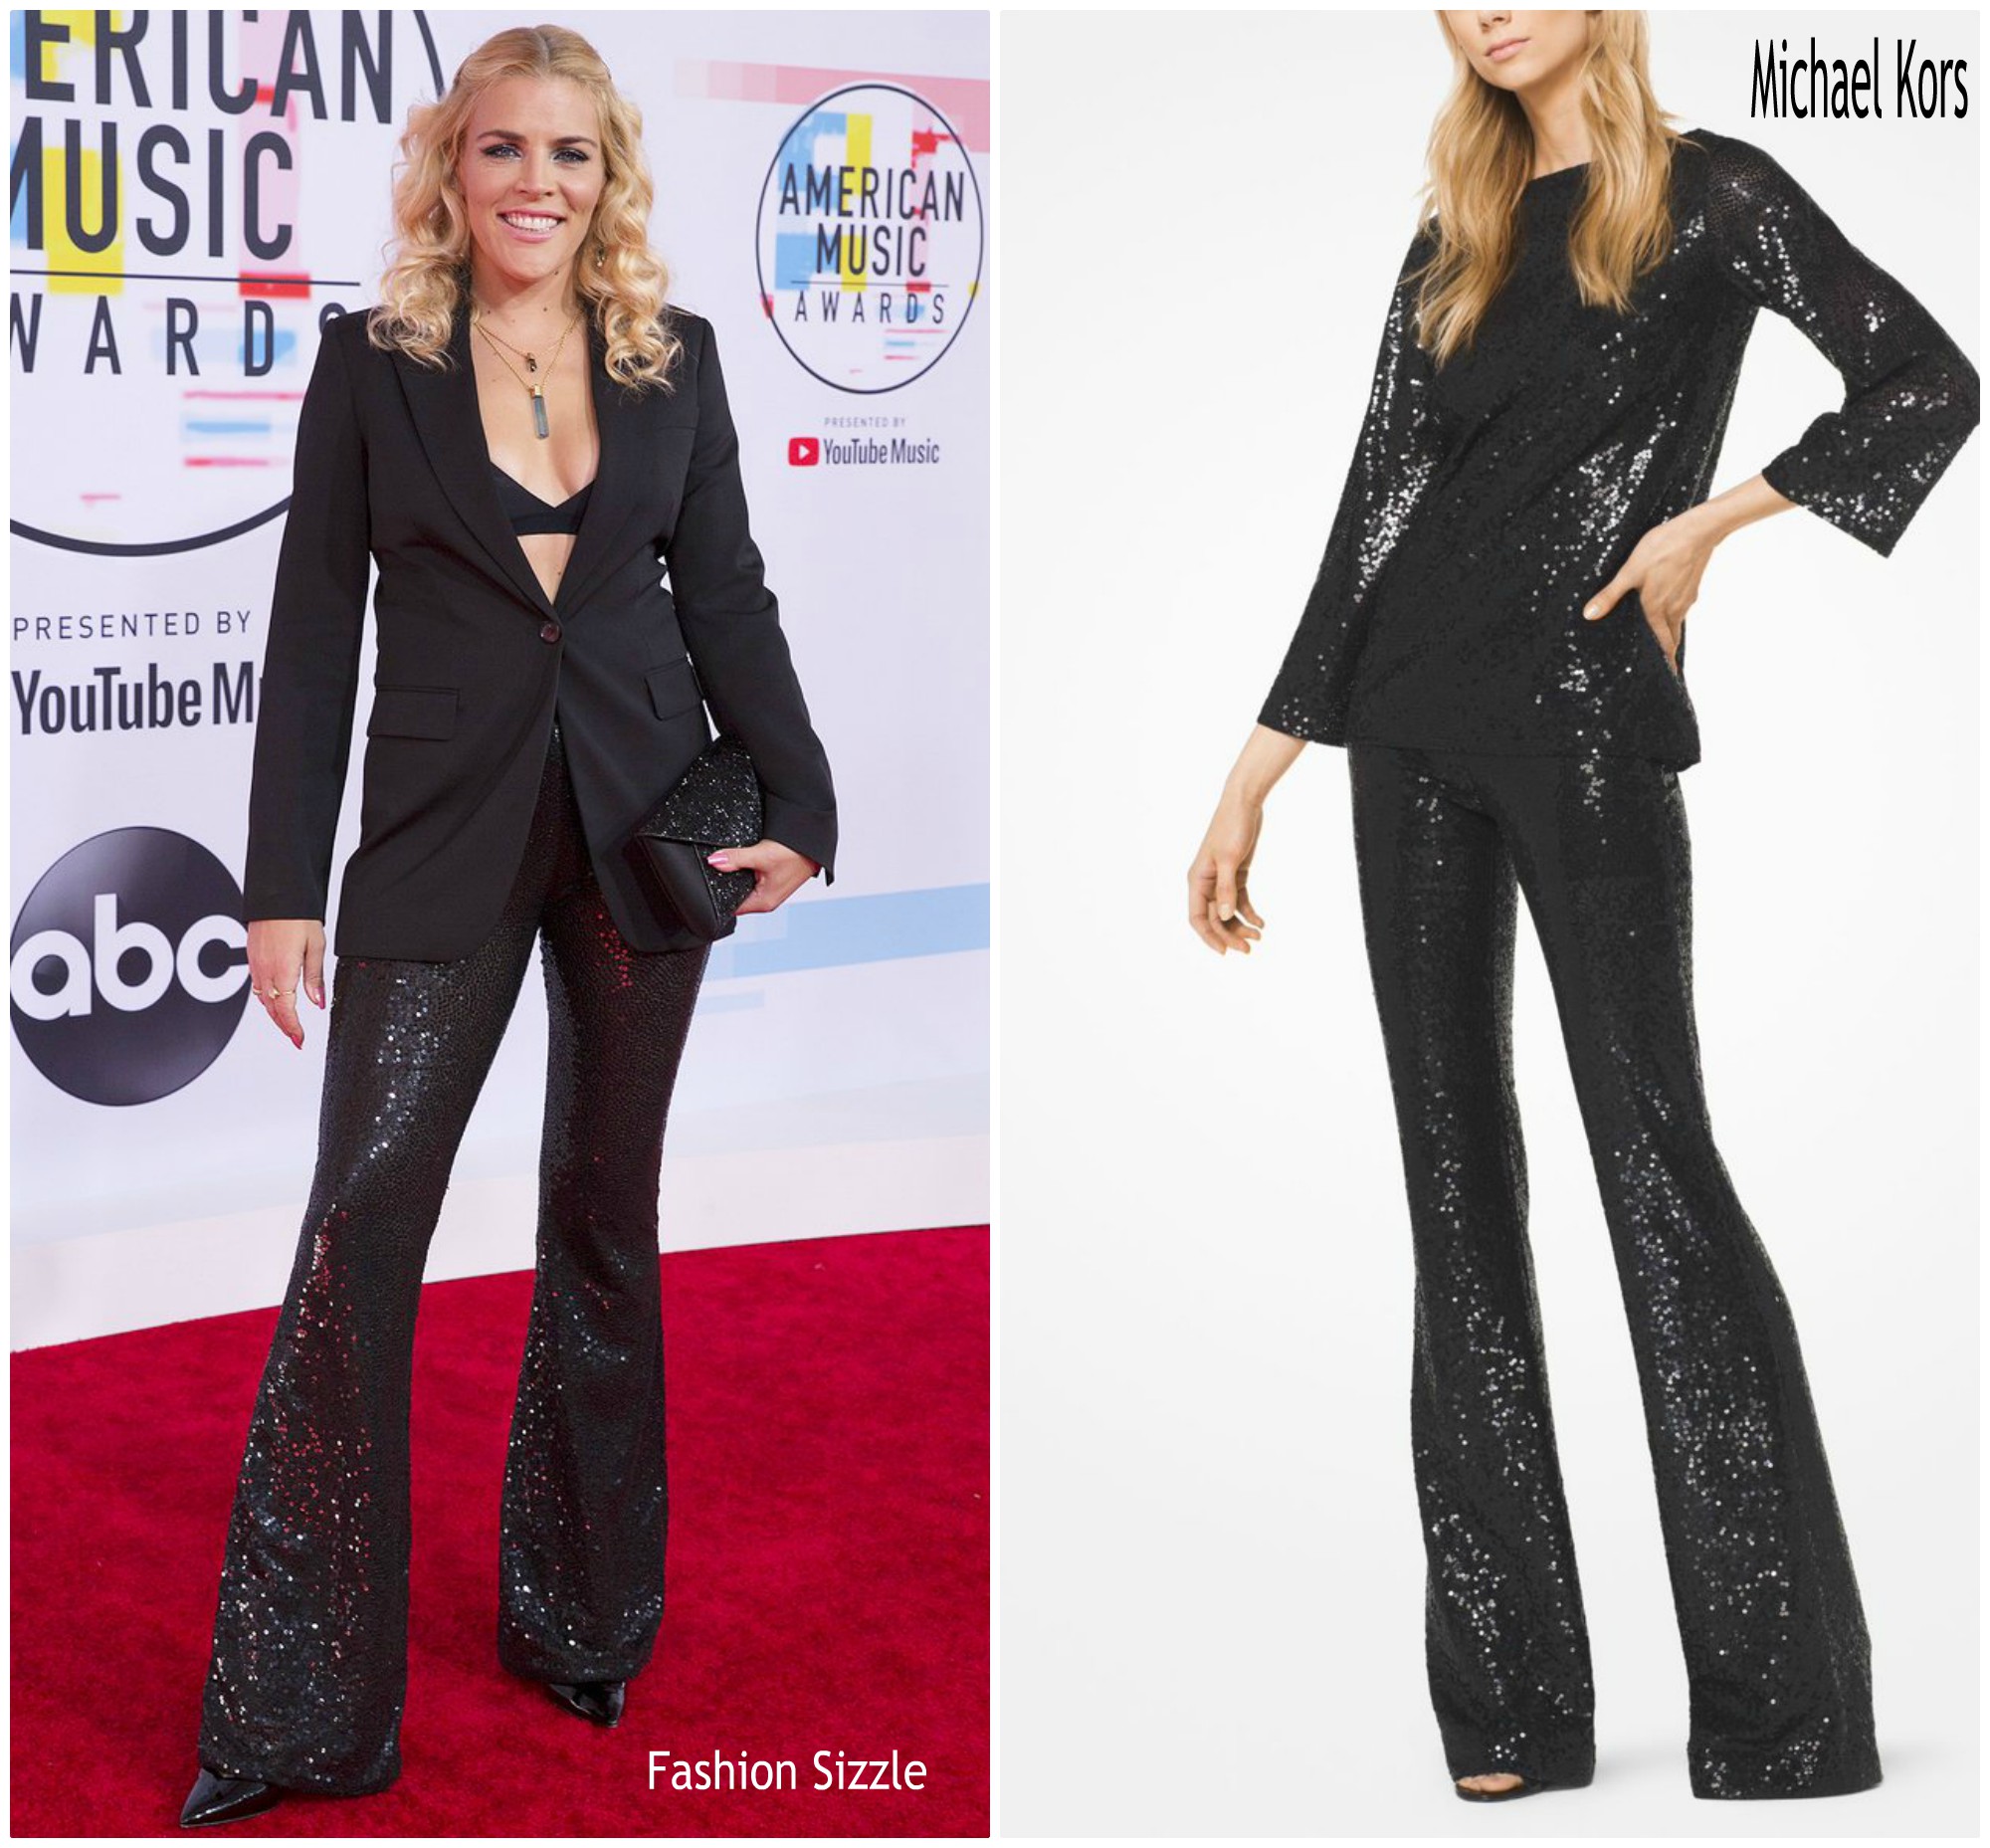 busy-philipps-in-michael-kors-2018-american-music-awards